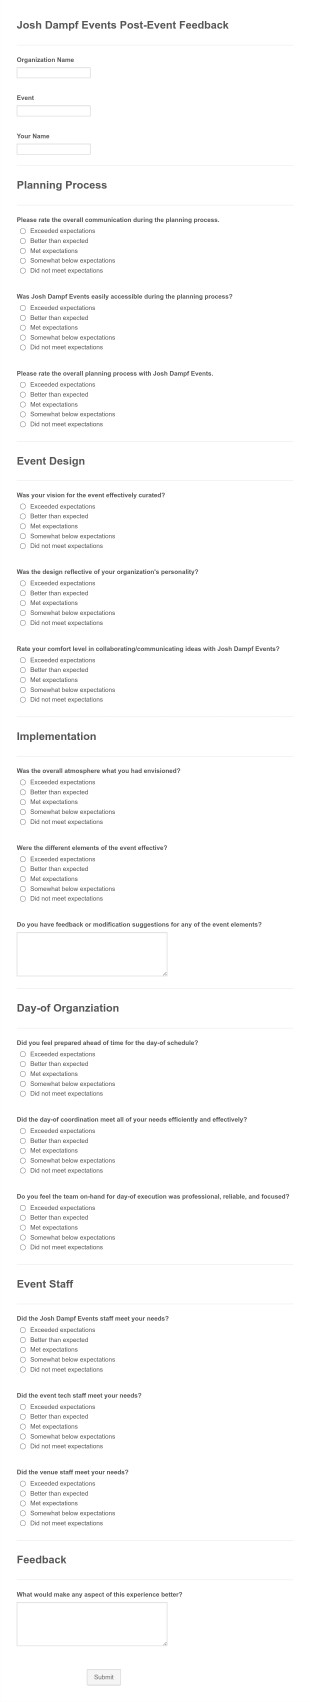 Josh Dampf Events Post Event Feedback Form Template